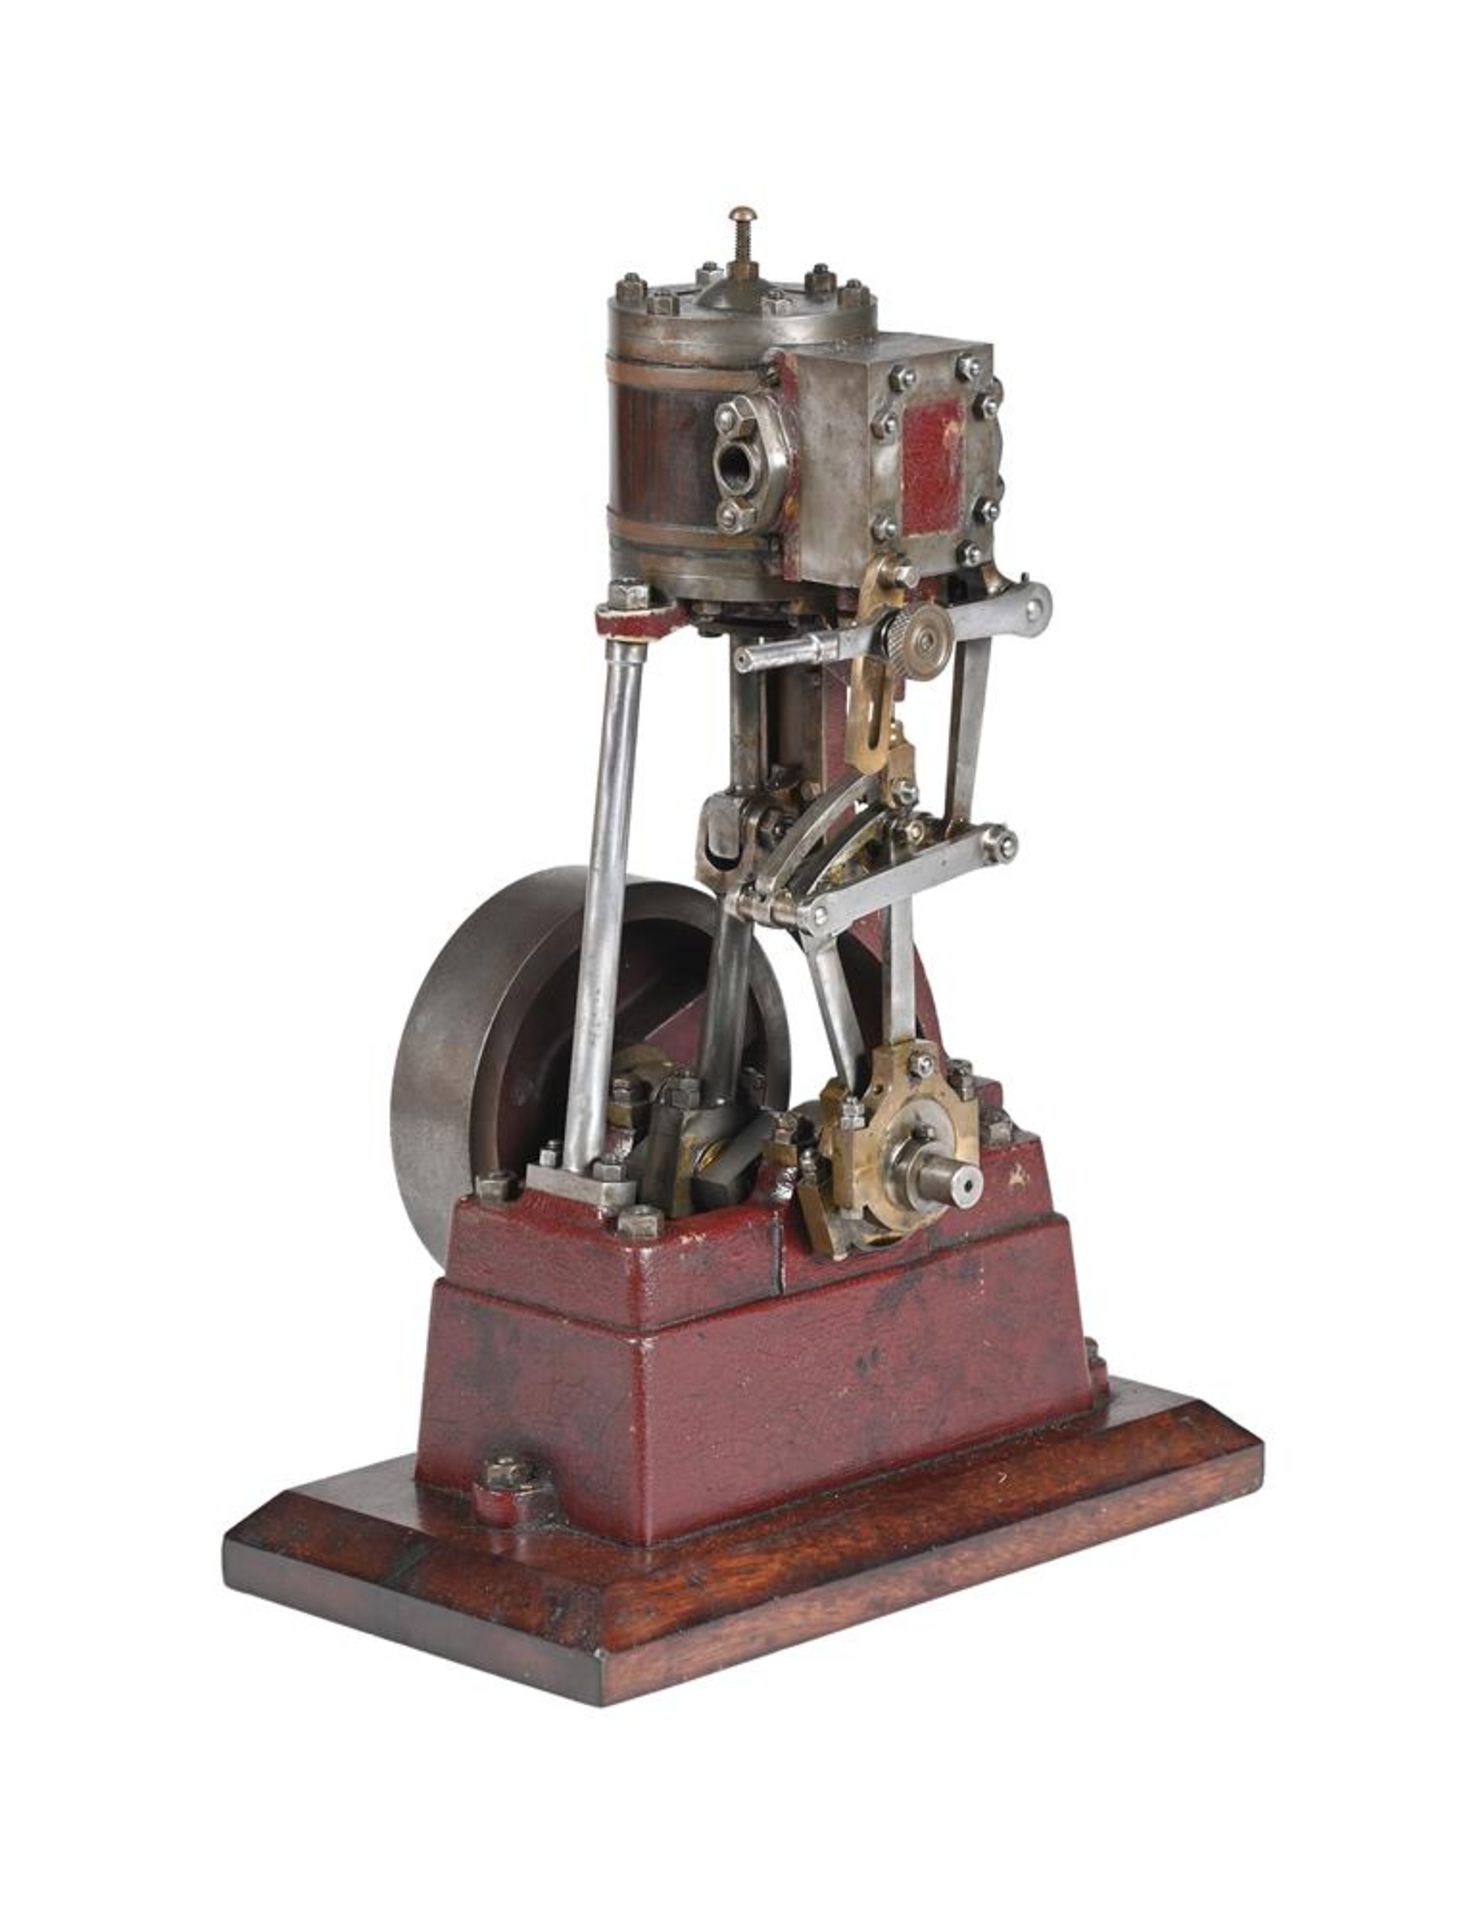 A VERY RARE STUART TURNER NO 1 VERTICAL MARINE STEAM ENGINE, EARLY 20TH CENTURY - Image 2 of 2